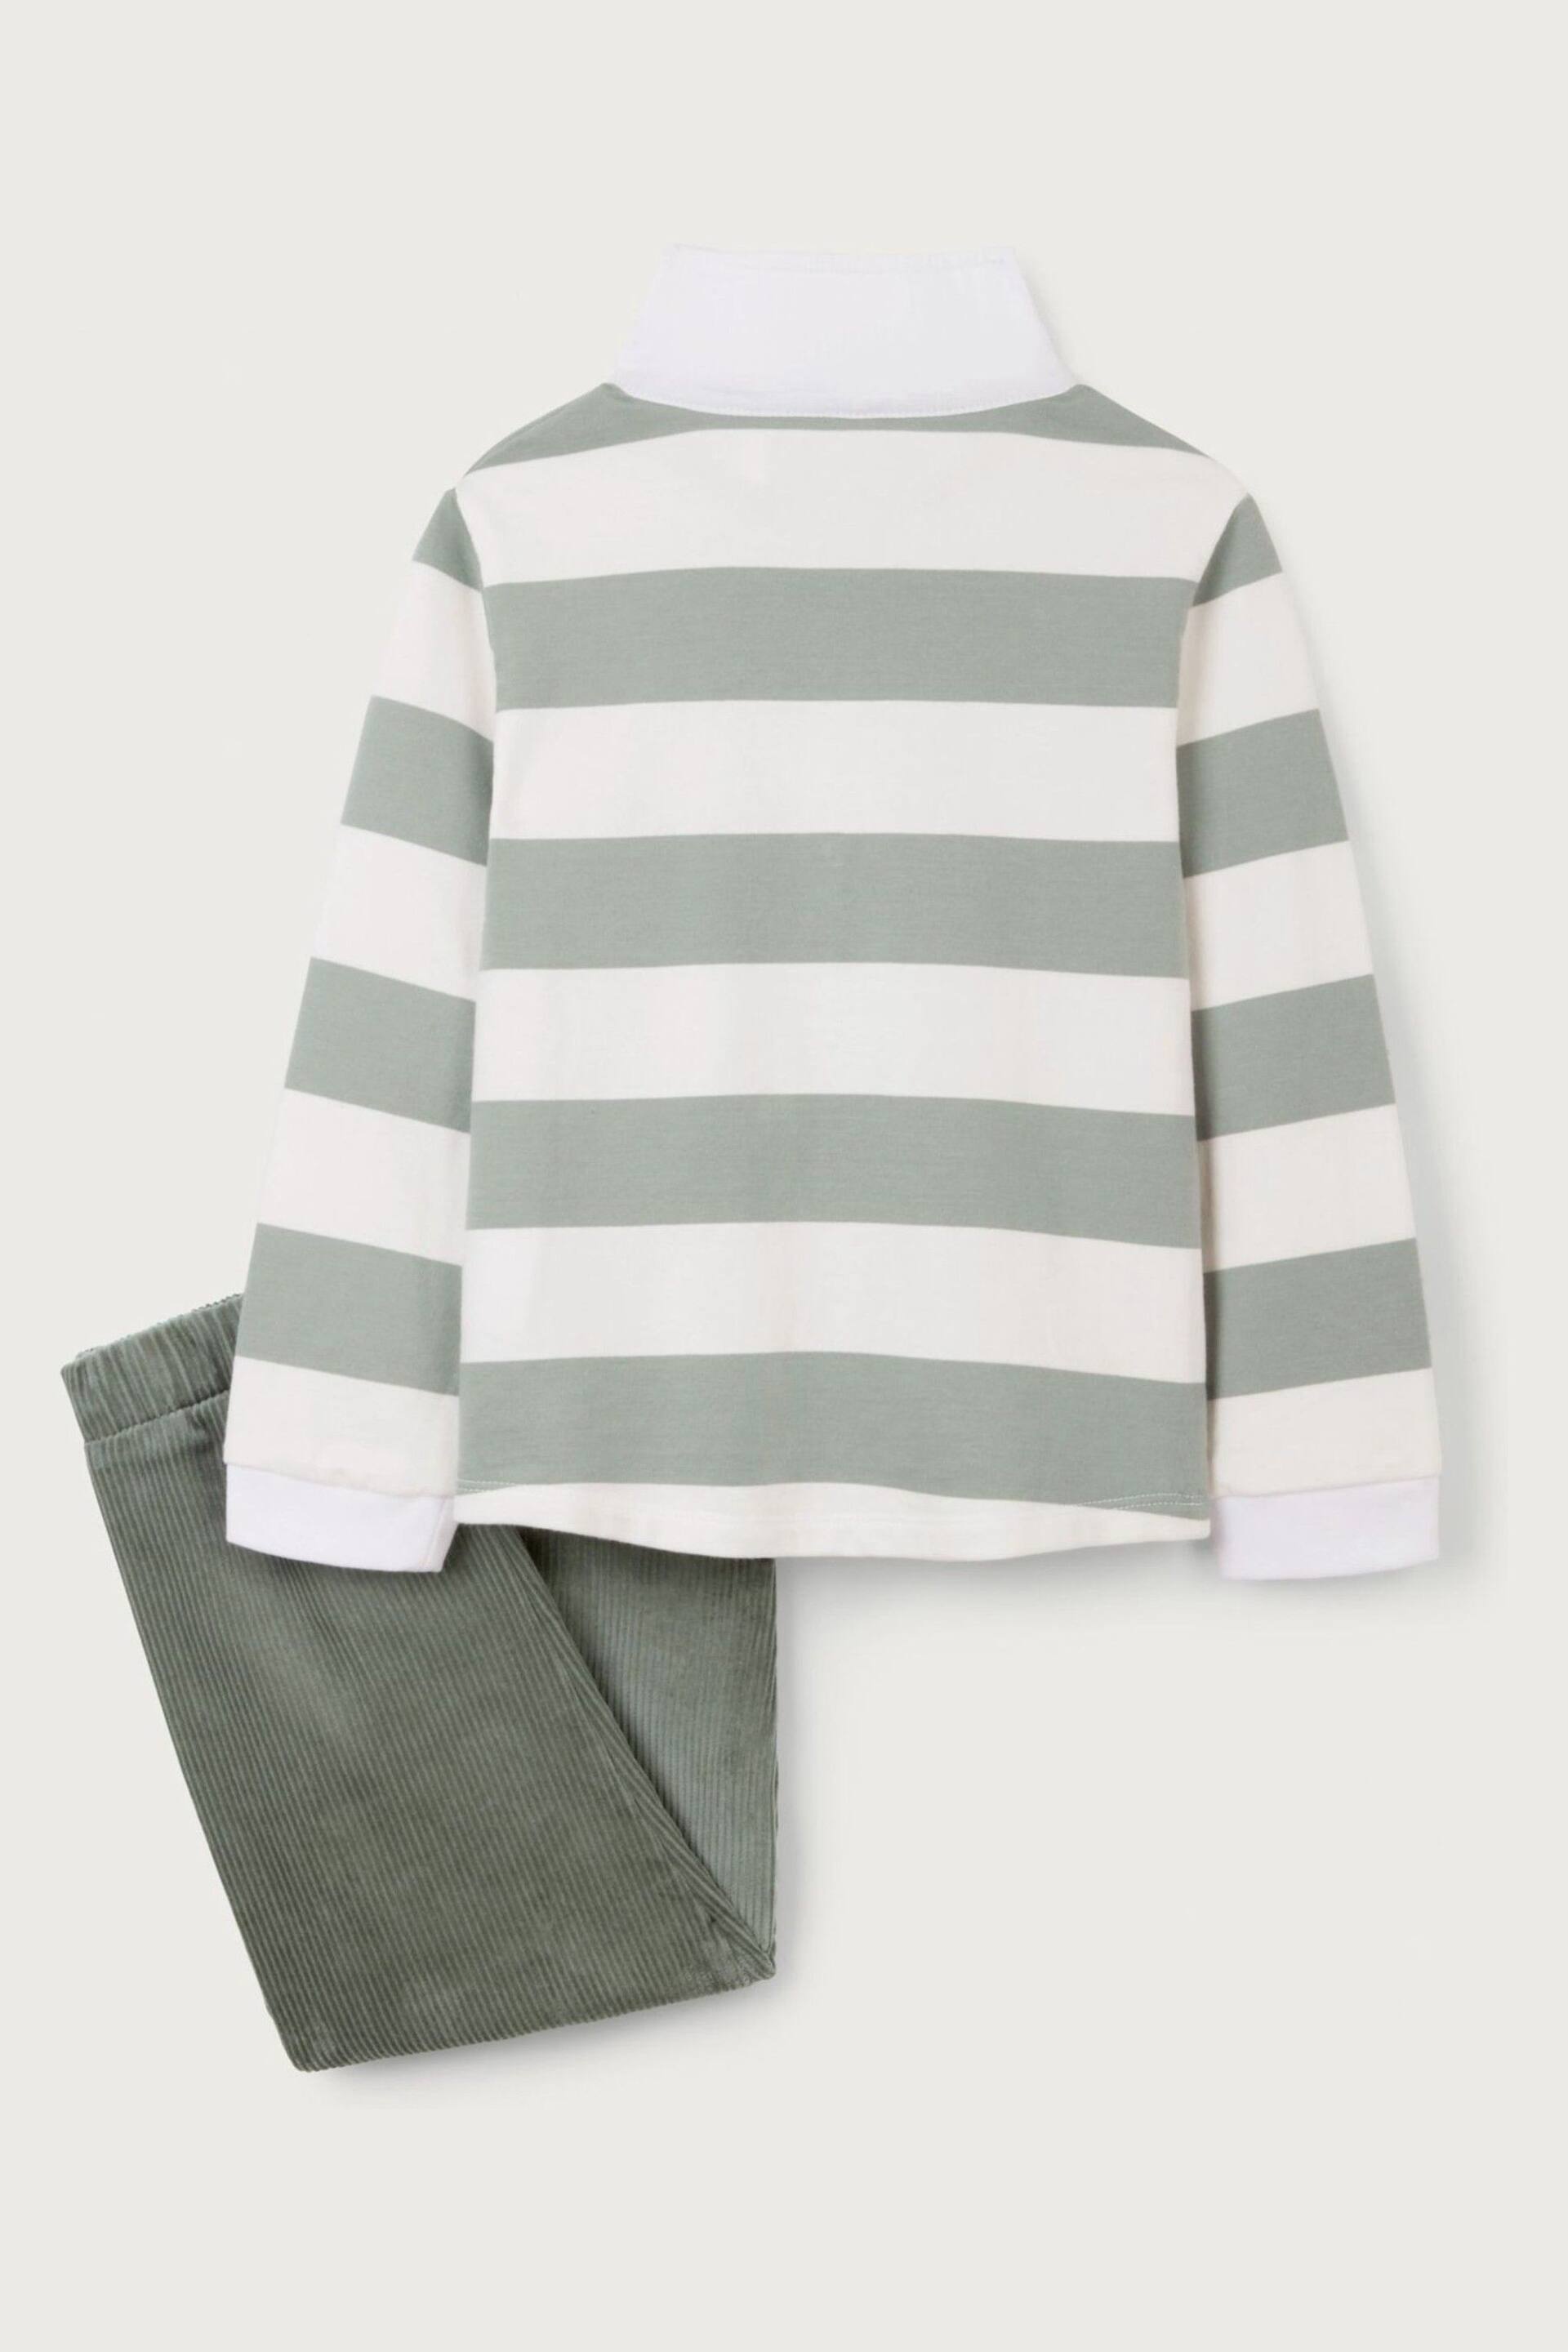 The White Company Green Organic Cotton Rugby Shirt & Cord Trouser Set - Image 10 of 10